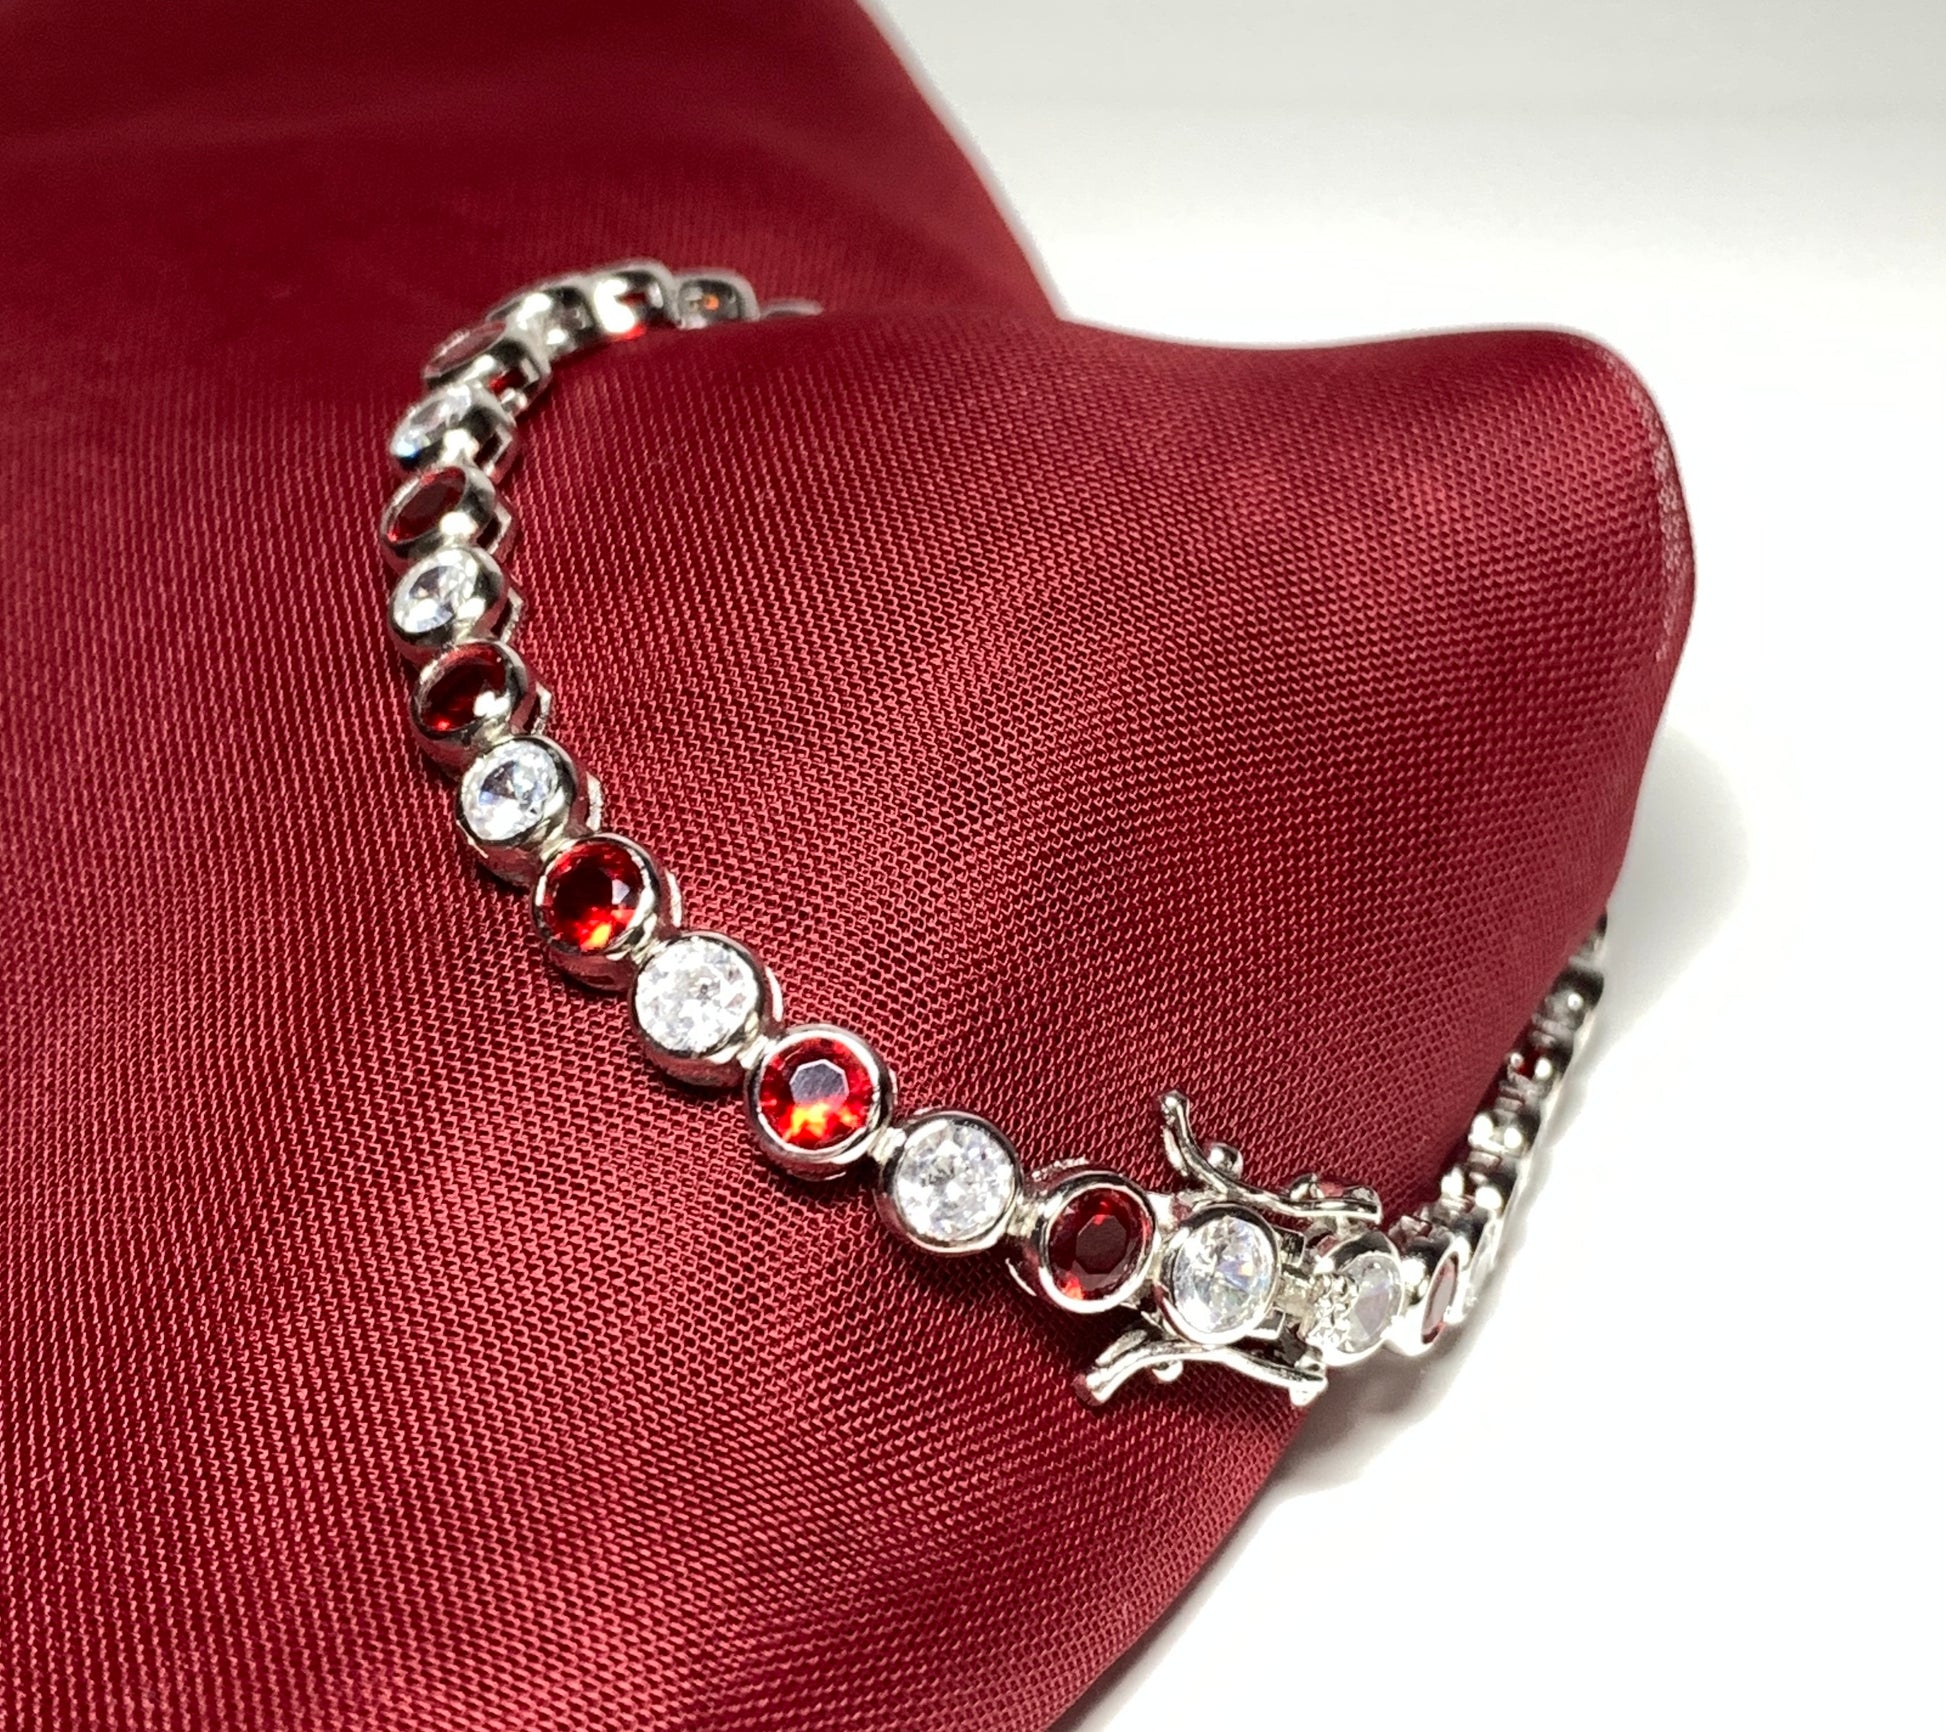 Tennis bracelet red and white sterling silver cubic zirconia stone set